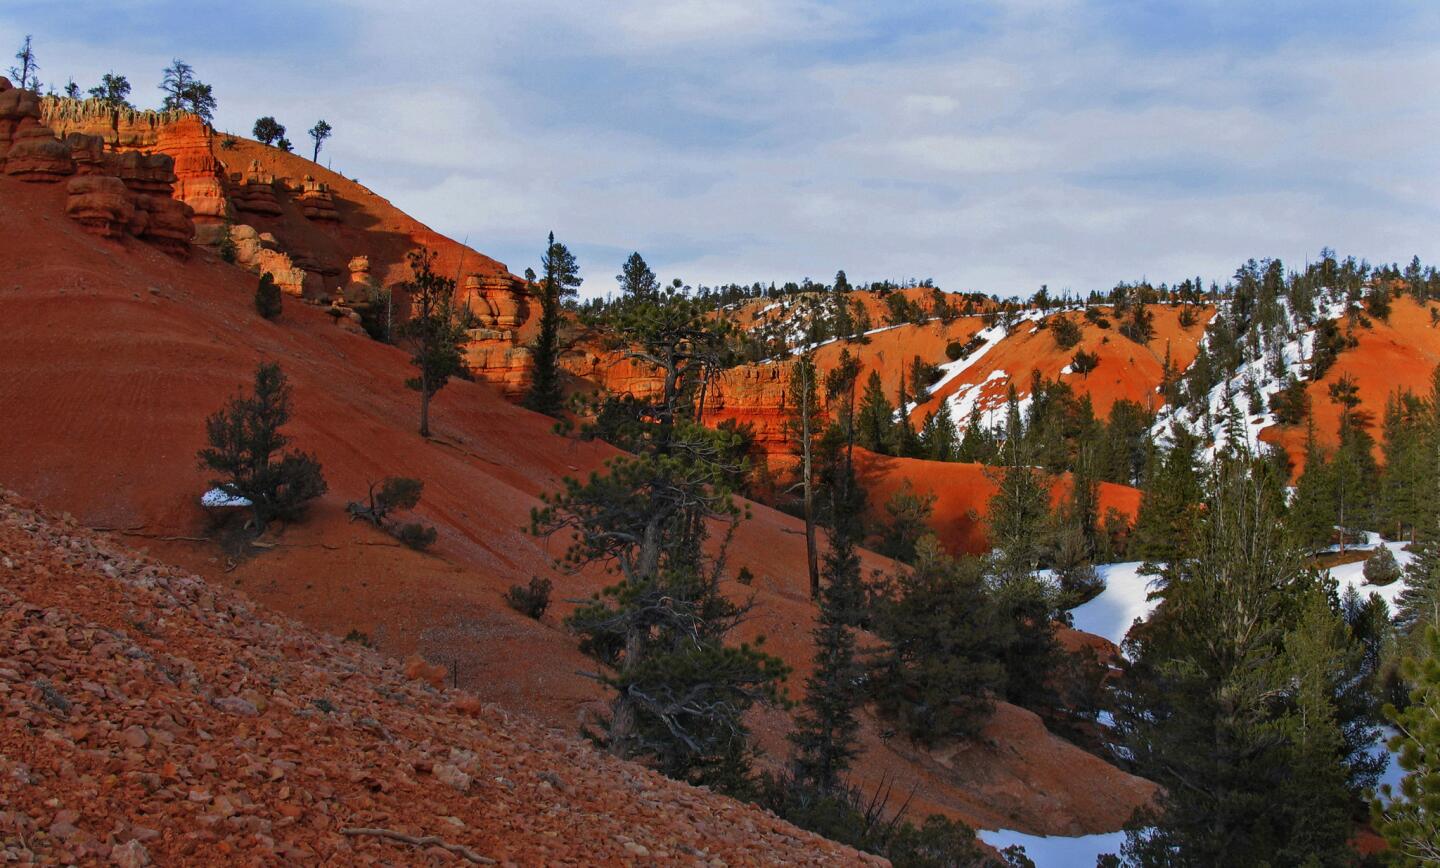 13. Bryce Canyon National Park